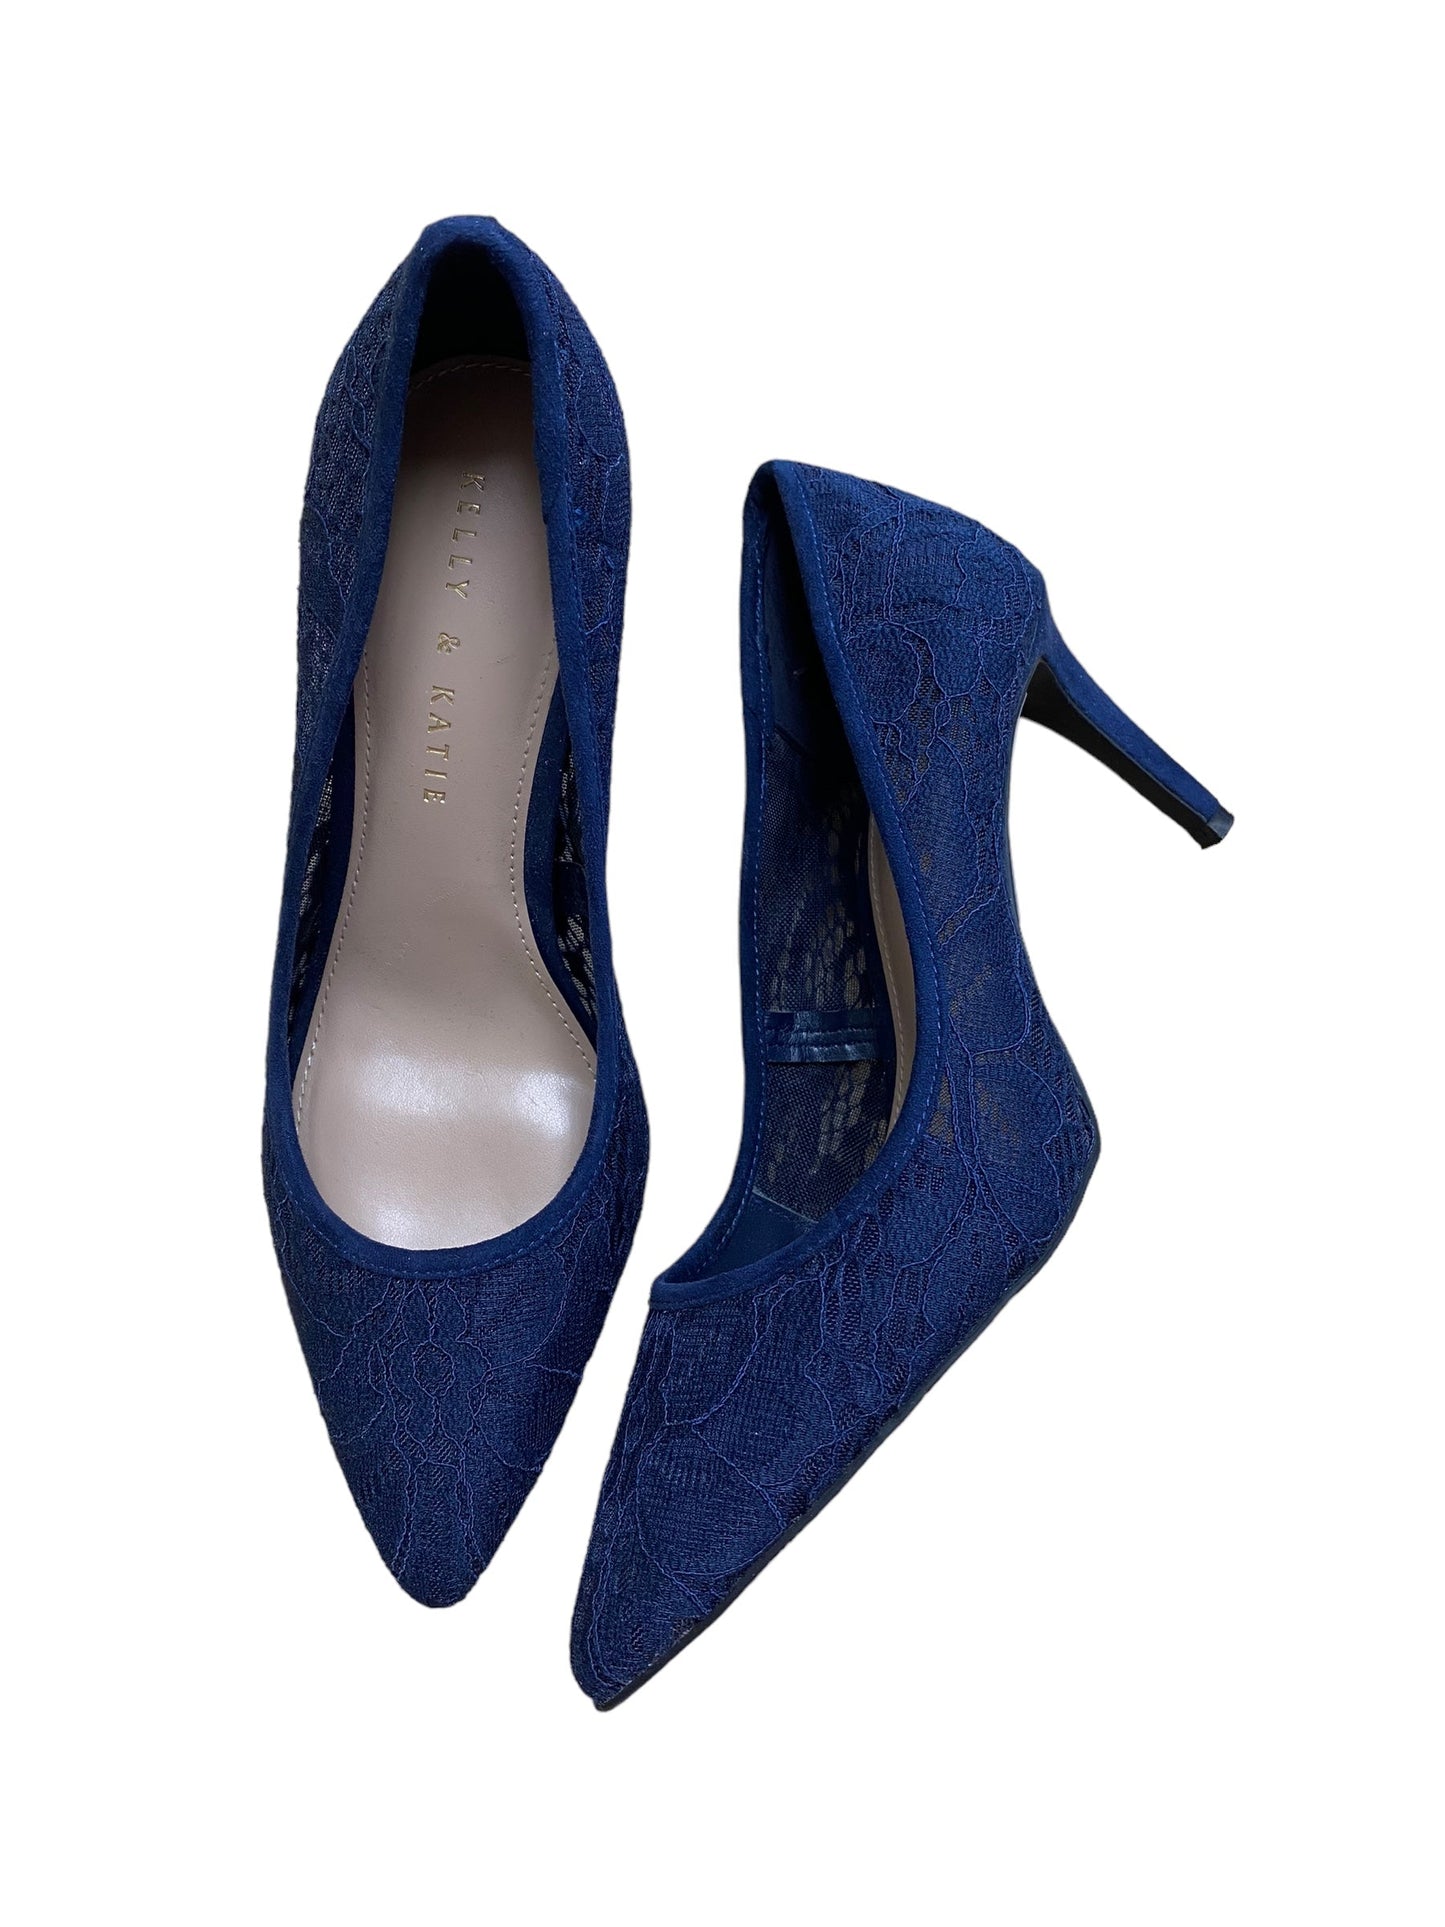 Blue Shoes Heels Stiletto Kelly And Katie, Size 7.5